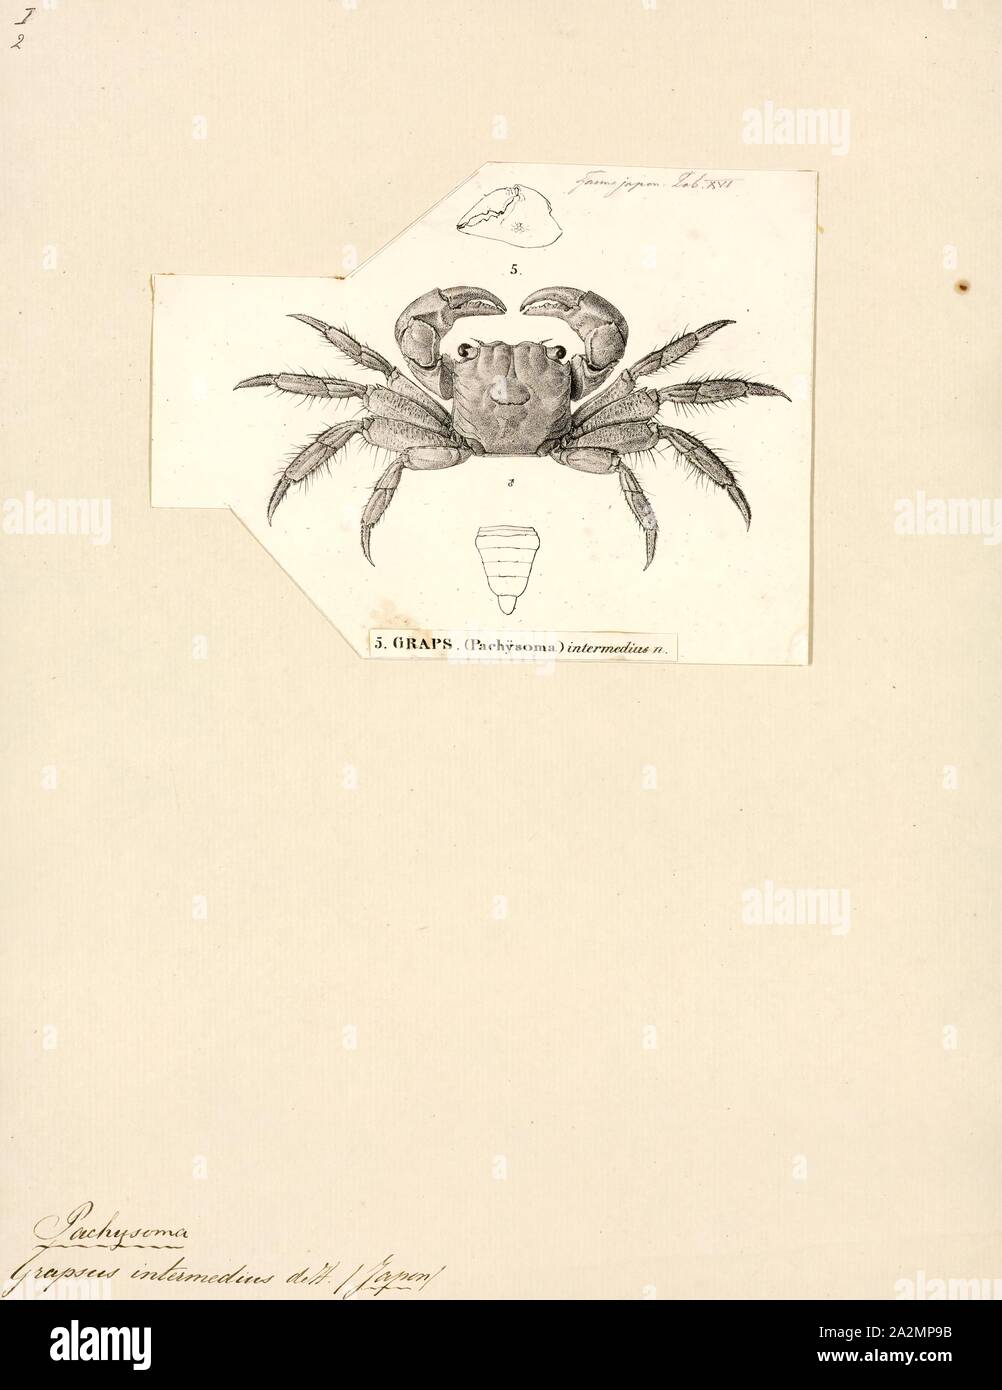 Grapsus intermedius, Print, Grapsus is a genus of lightfoot crabs, comprising the following species:'Grapsus' is a New Latin modification of Greek 'grapsaios' meaning 'crab Stock Photo